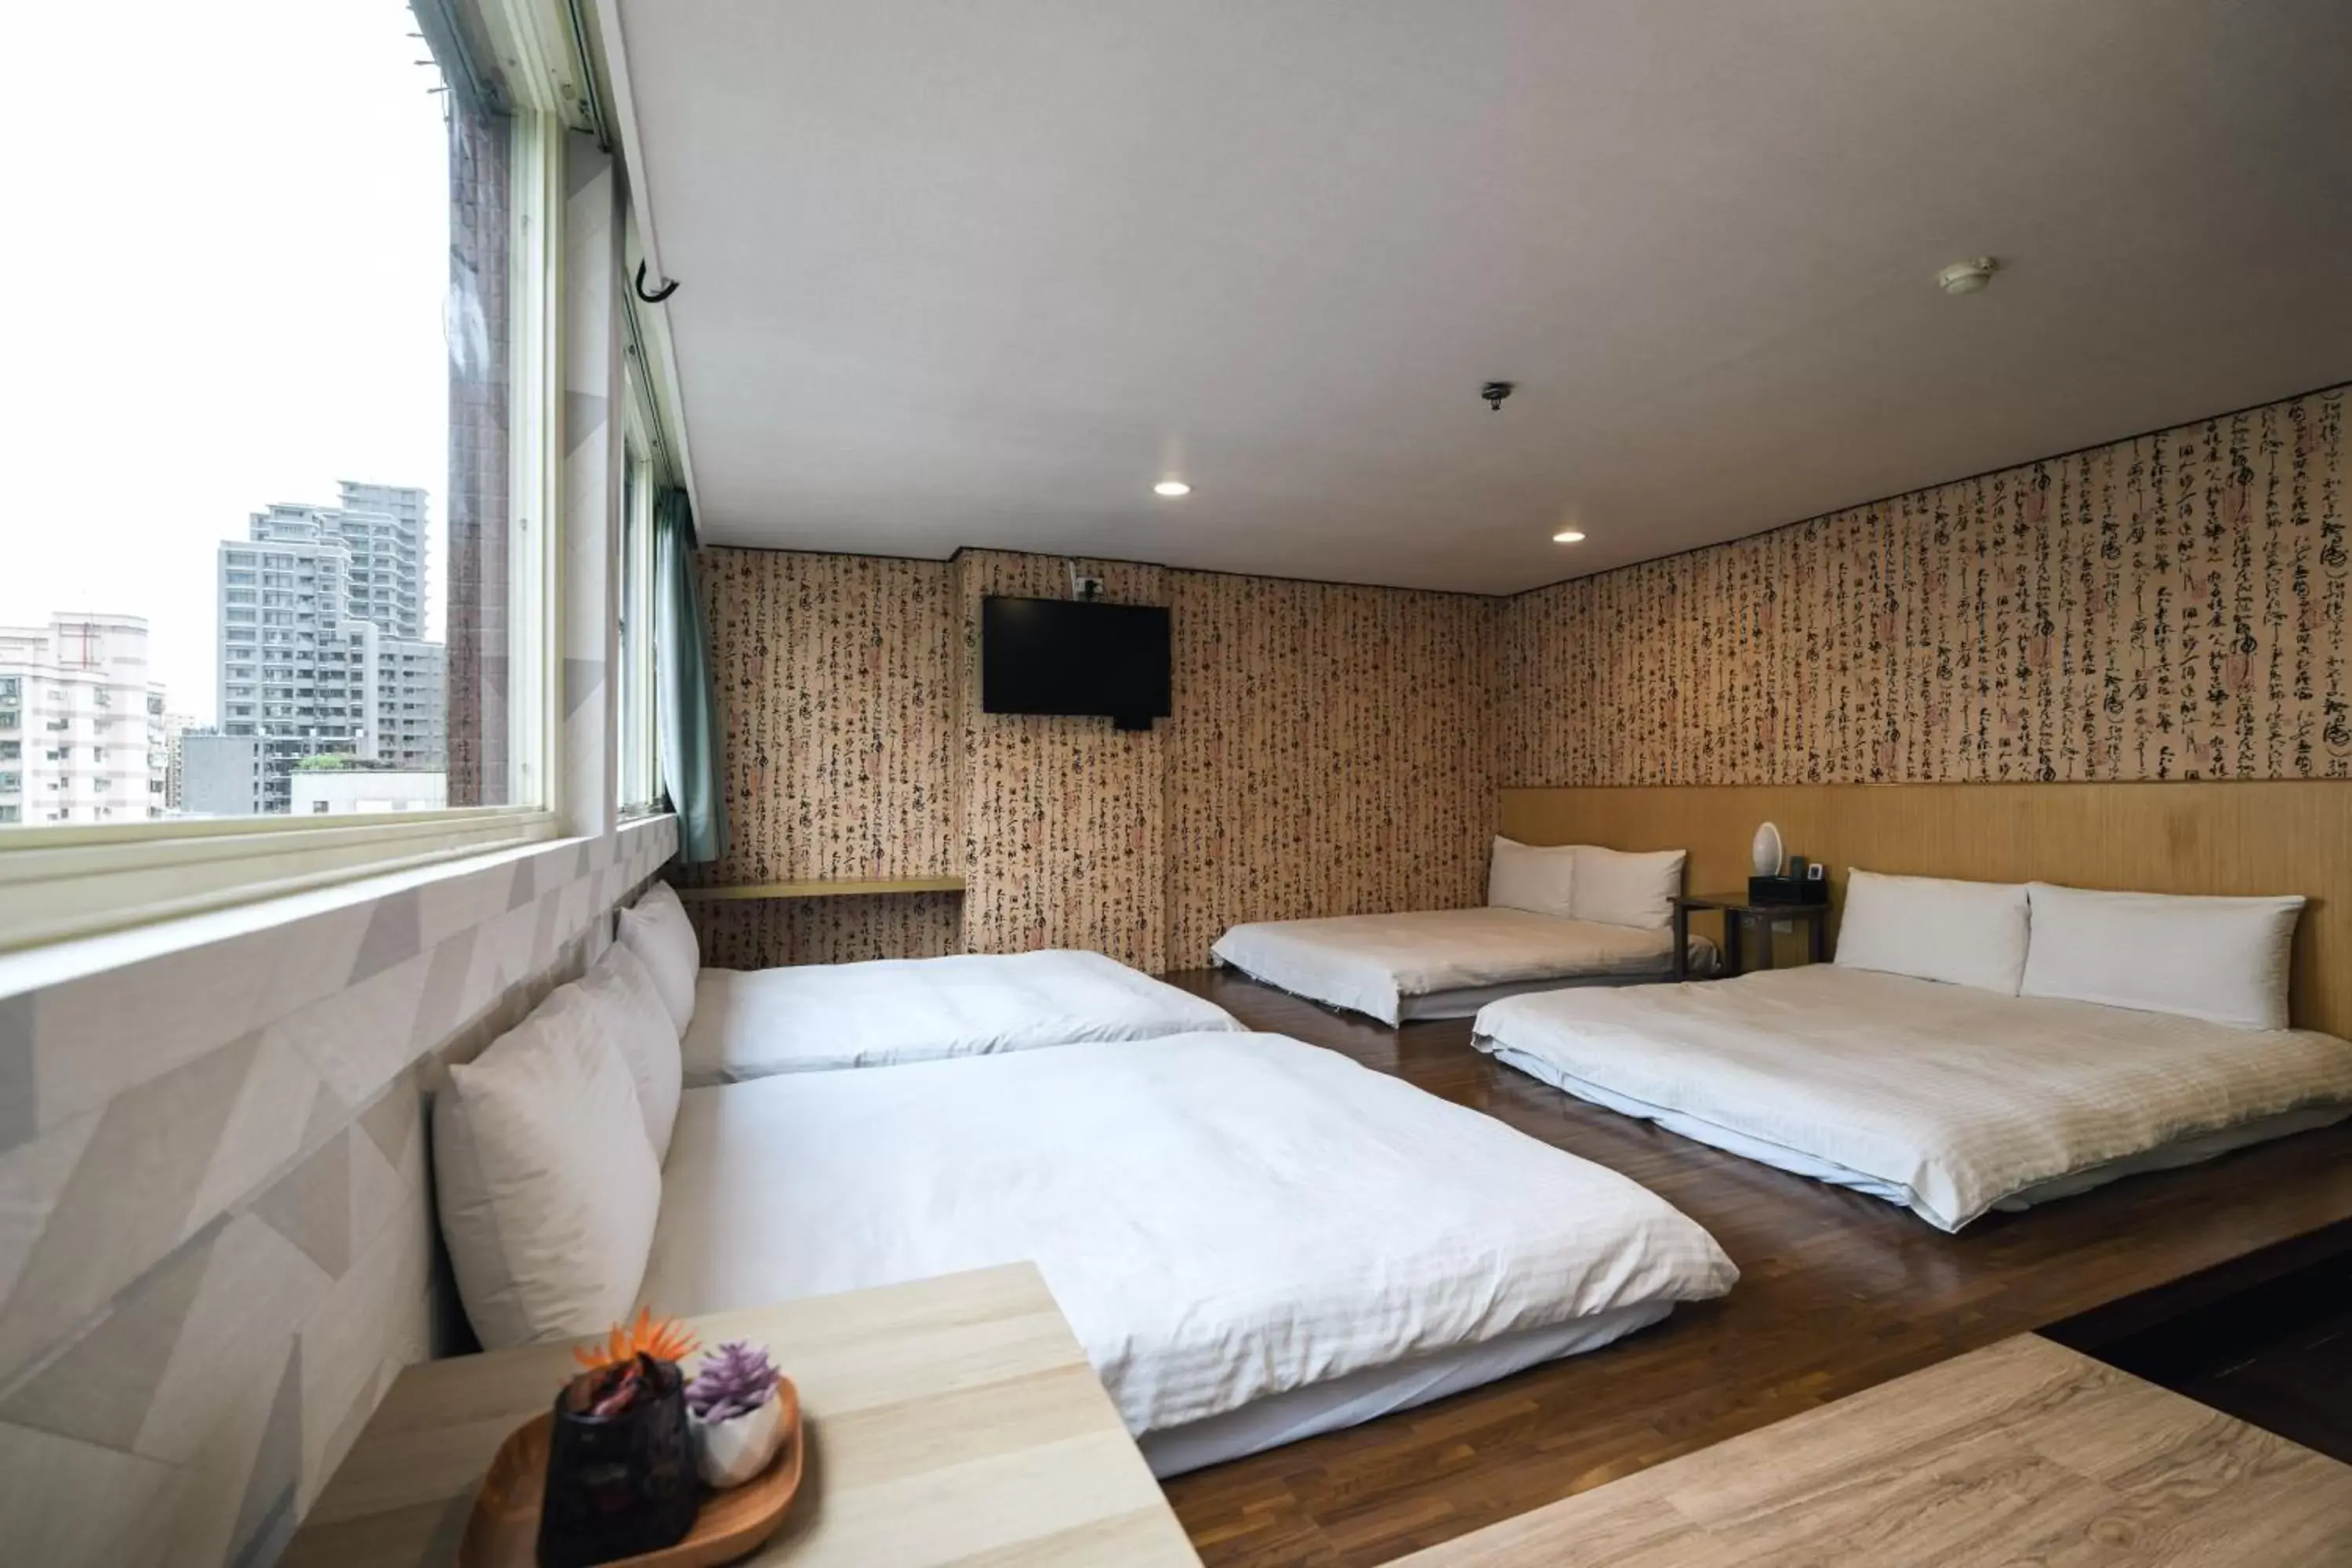 Property building, Bed in Sofu Hotel